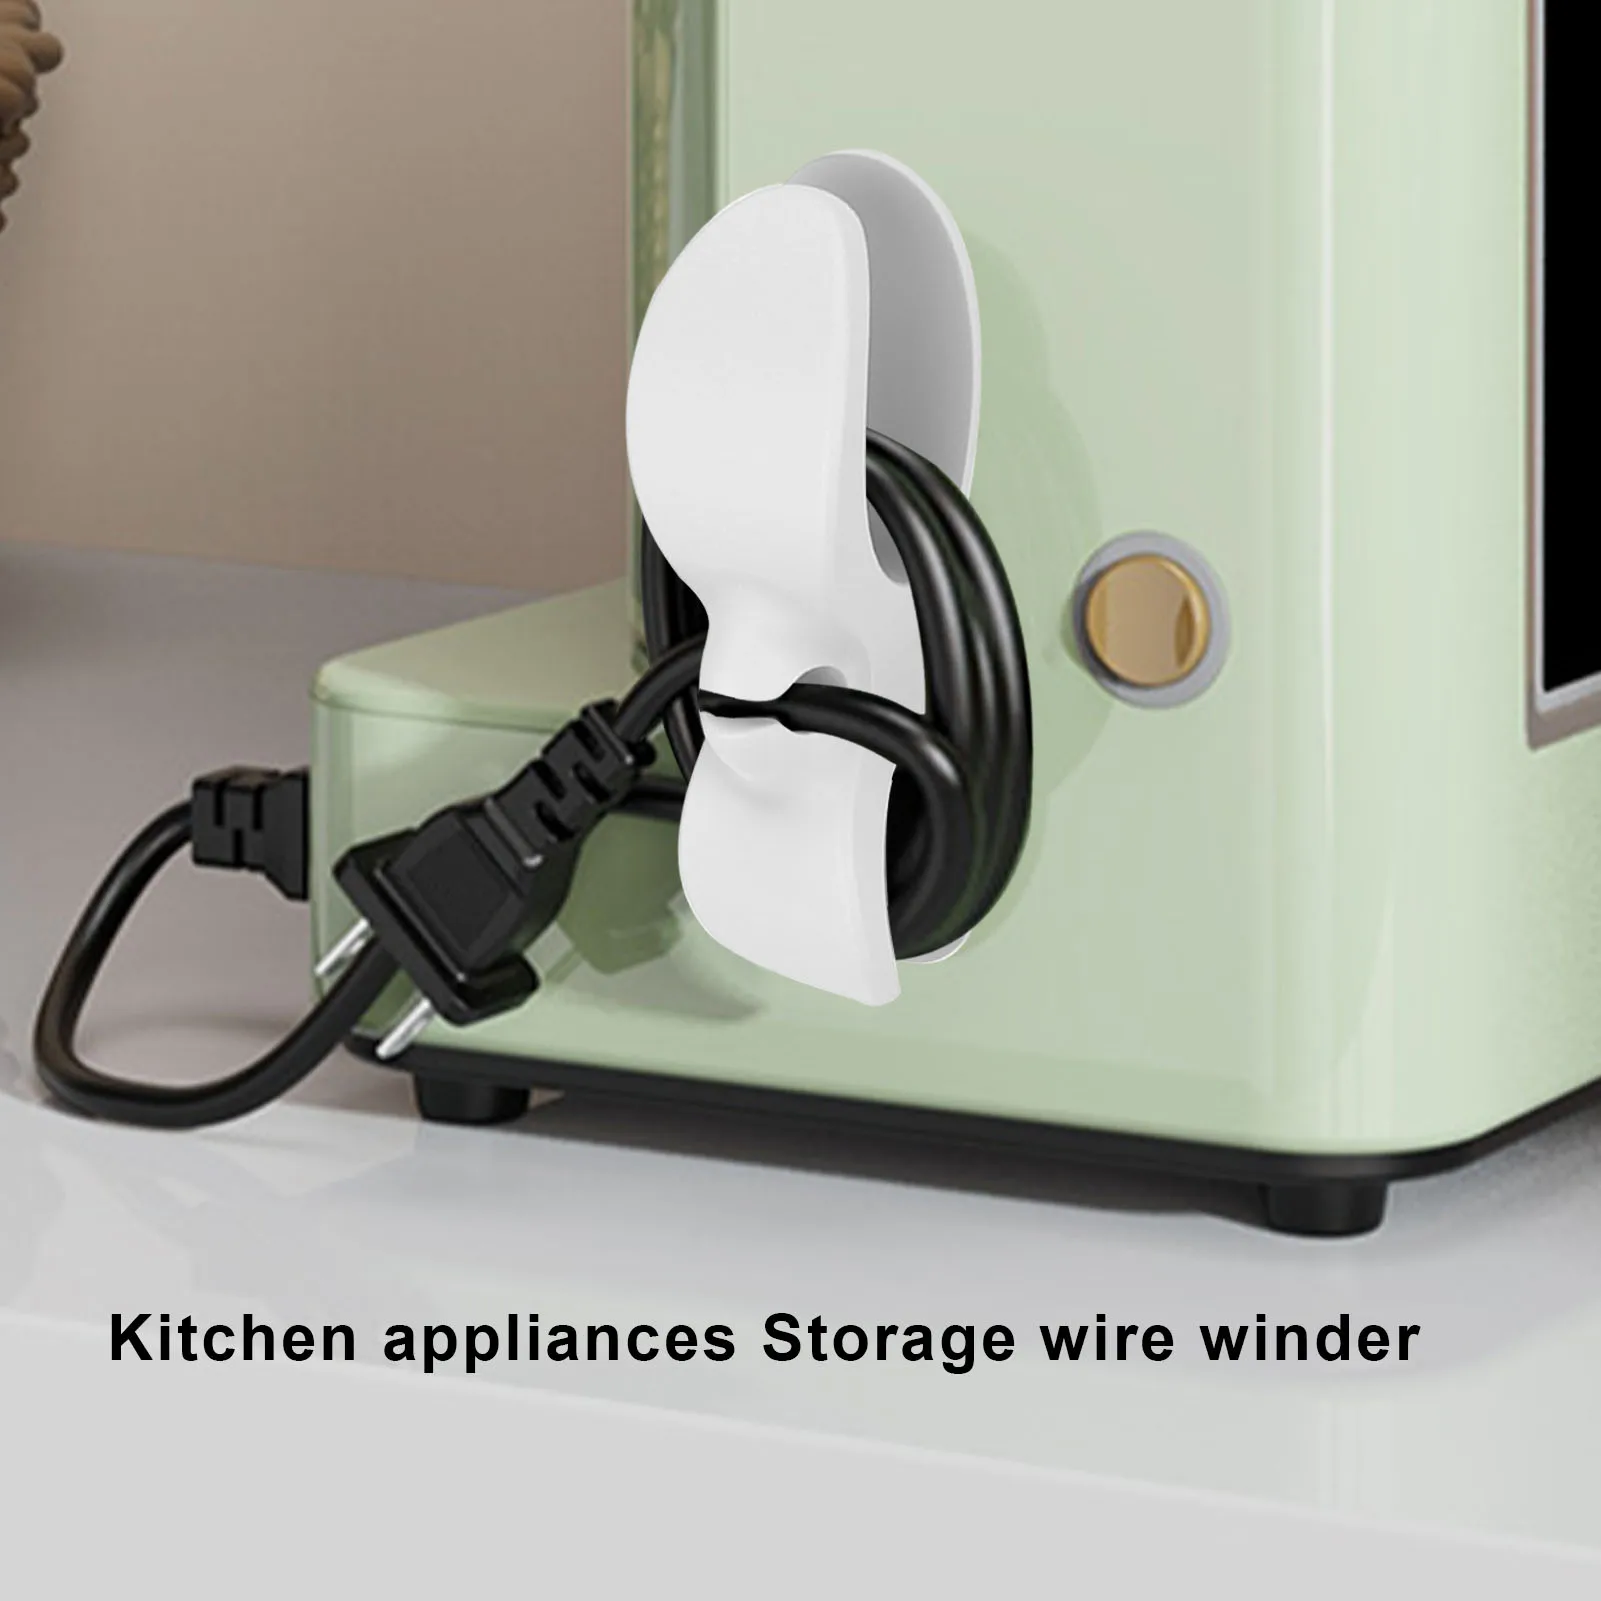 4pcs Cord Organizer for Appliances, Upgraded Kitchen Cord